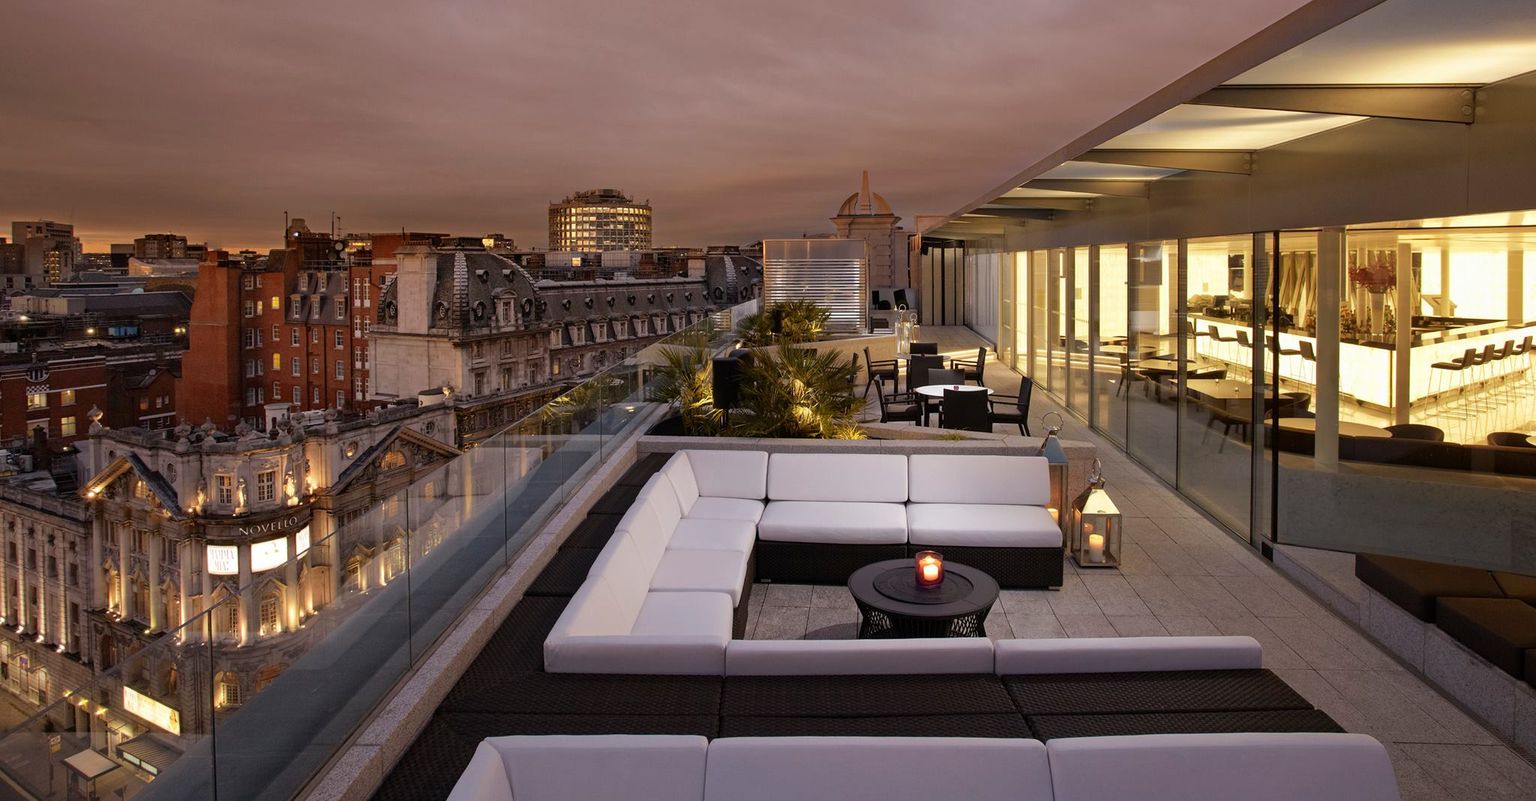 5 of the best rooftop terraces in London